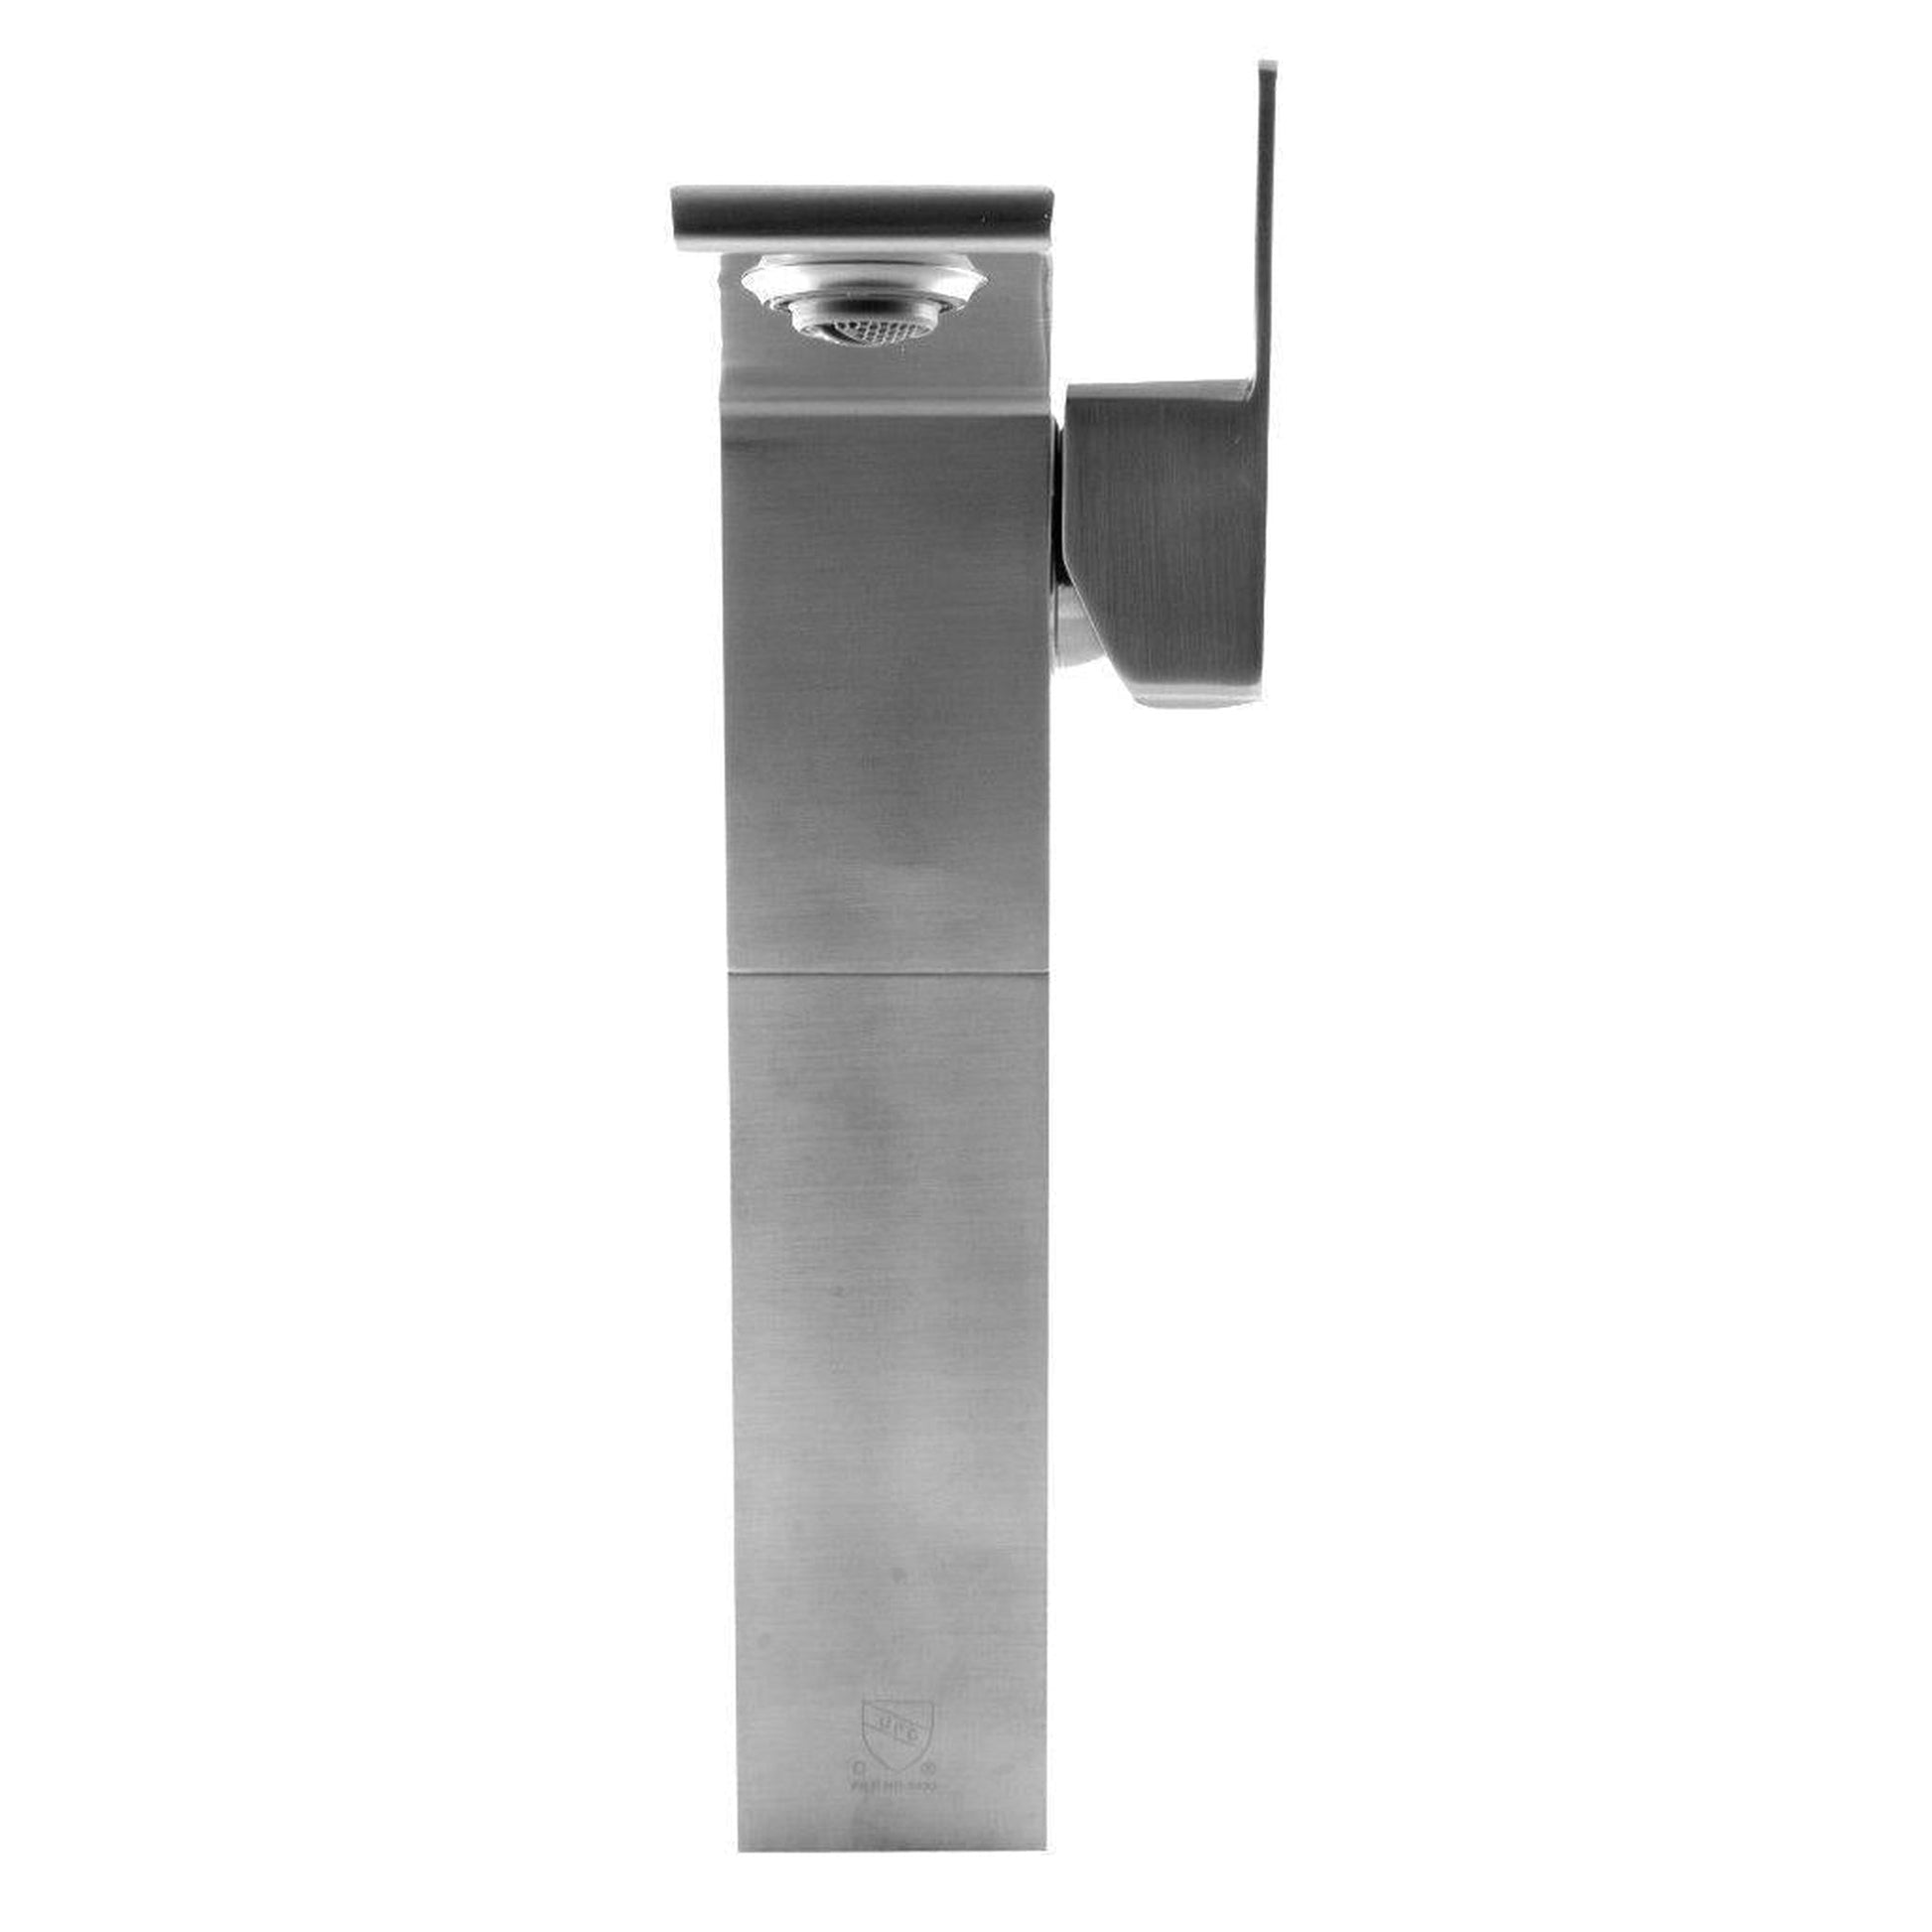 ALFI Brand AB1475-BN Brushed Nickel Vessel Square Spout Brass Bathroom Sink Faucet With Single Lever